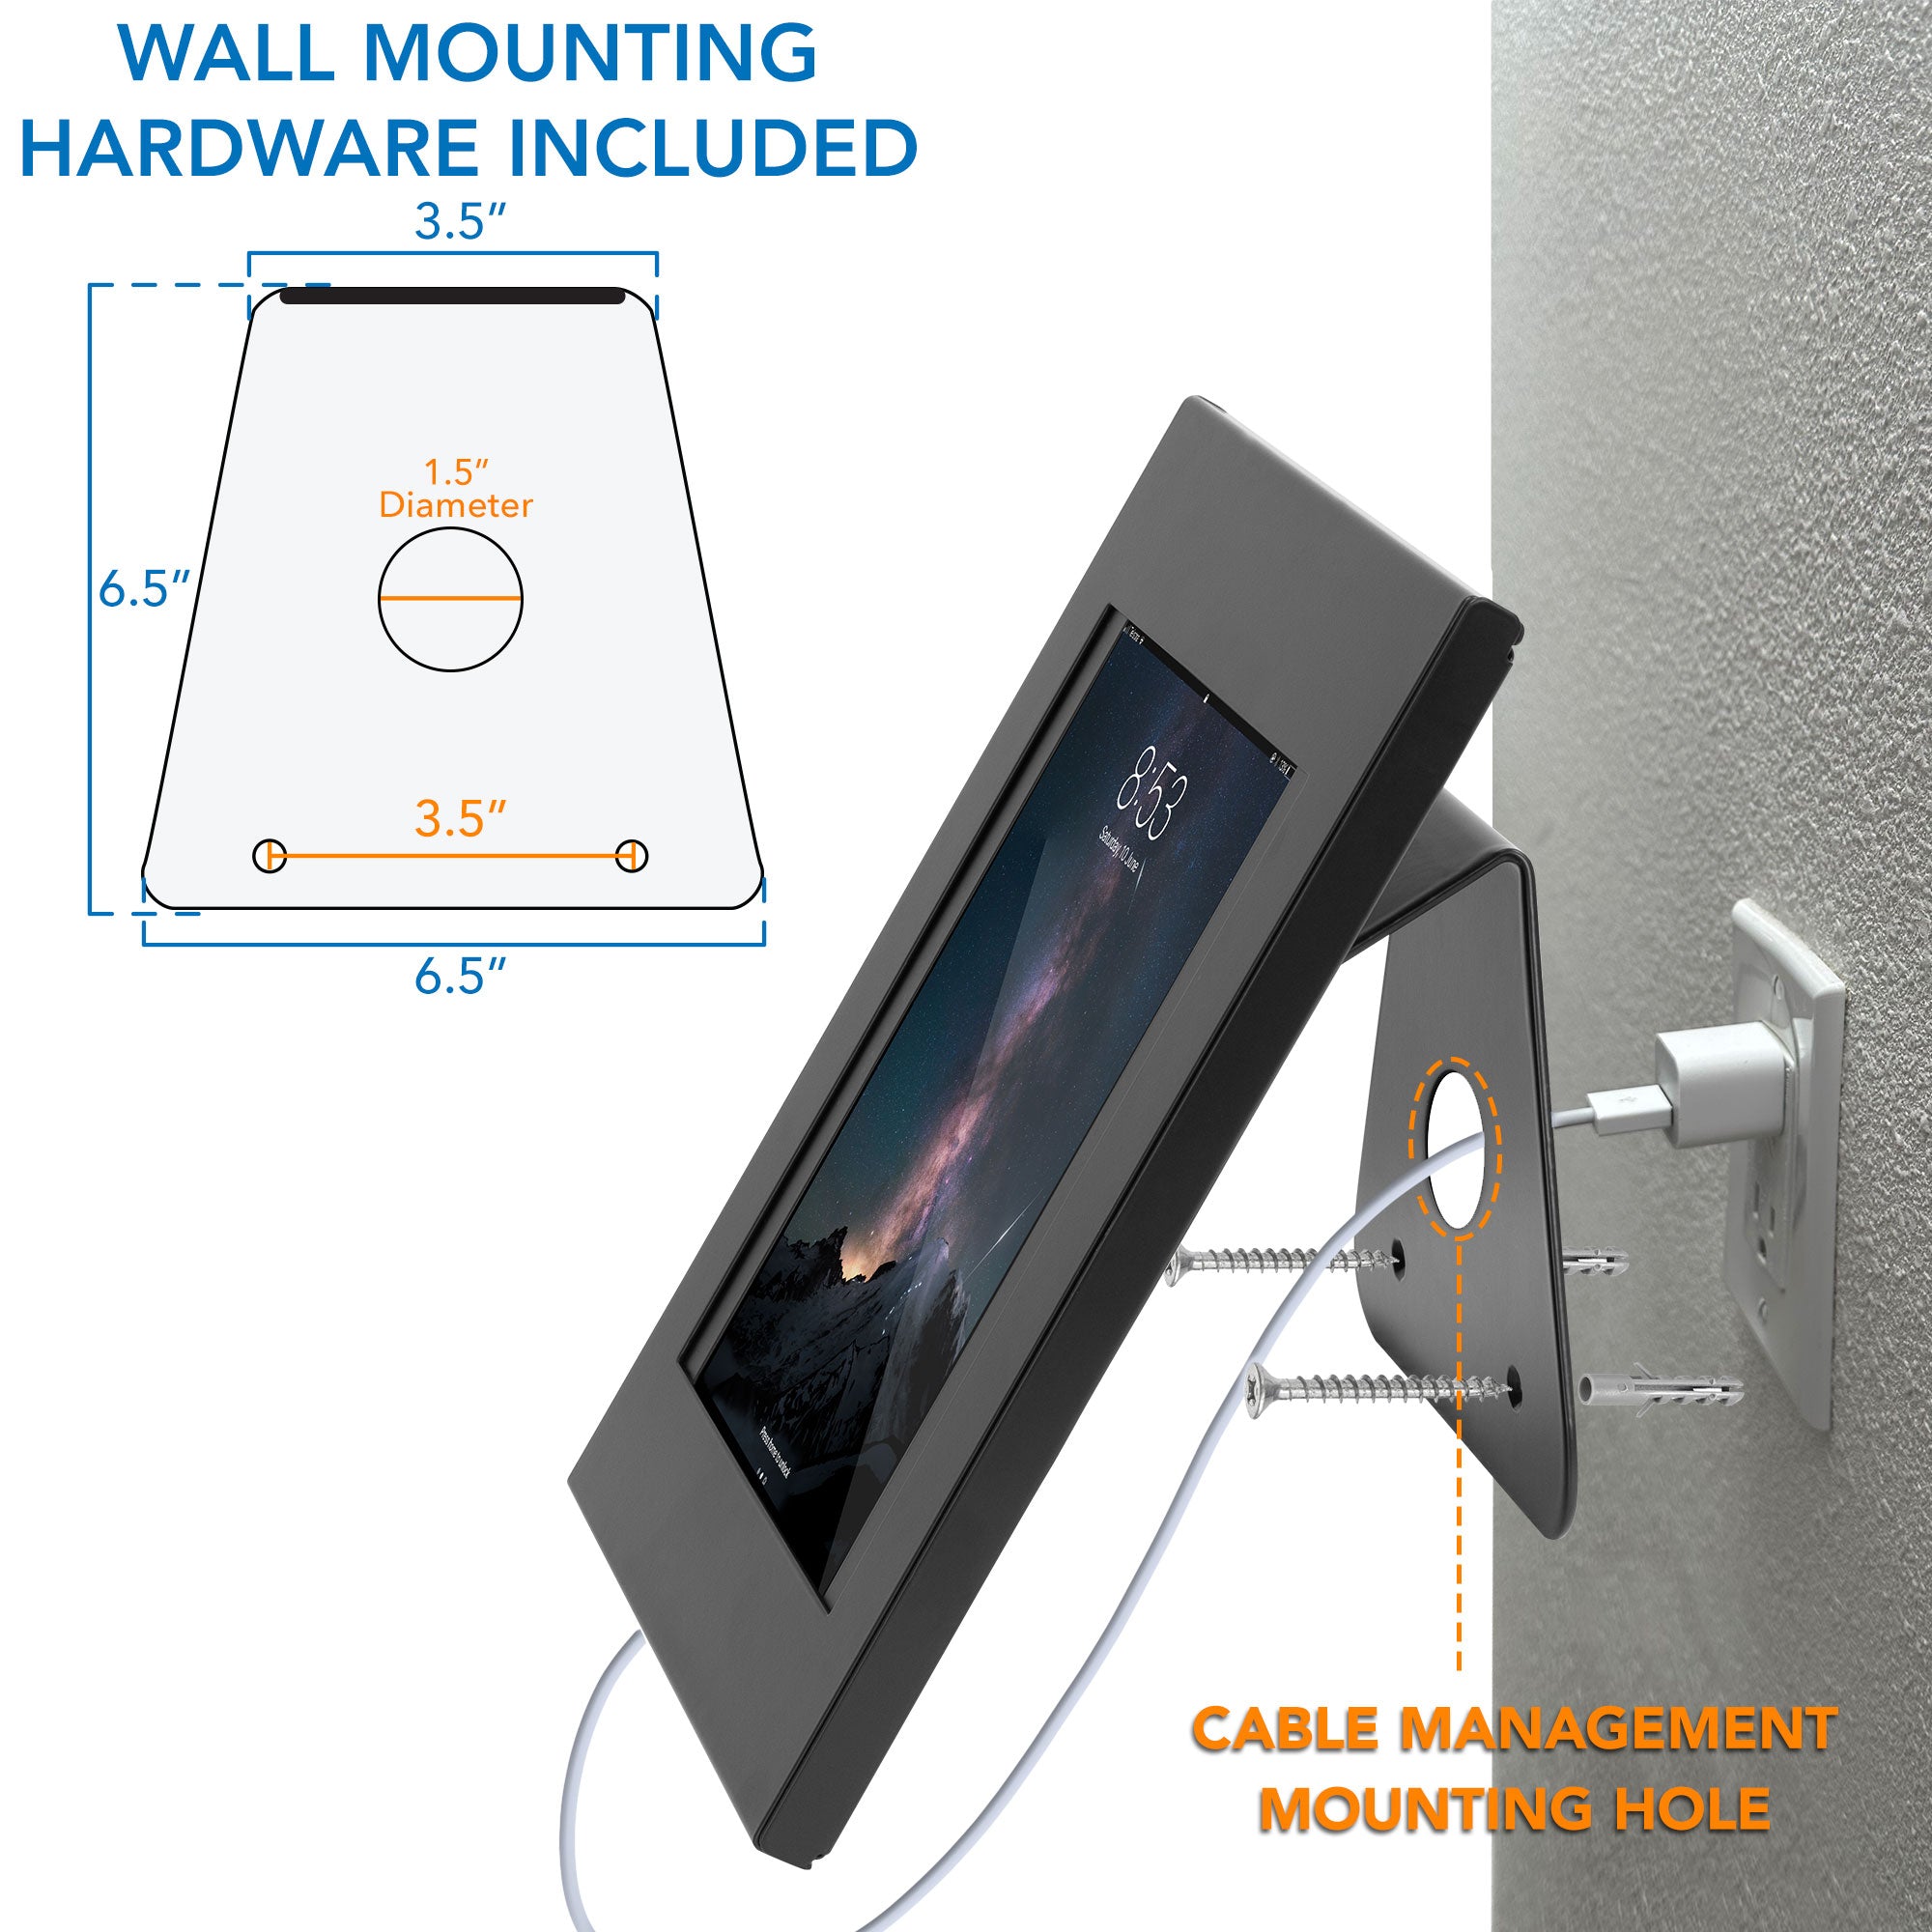 Anti-Theft Tablet Countertop Stand / Wall Mount